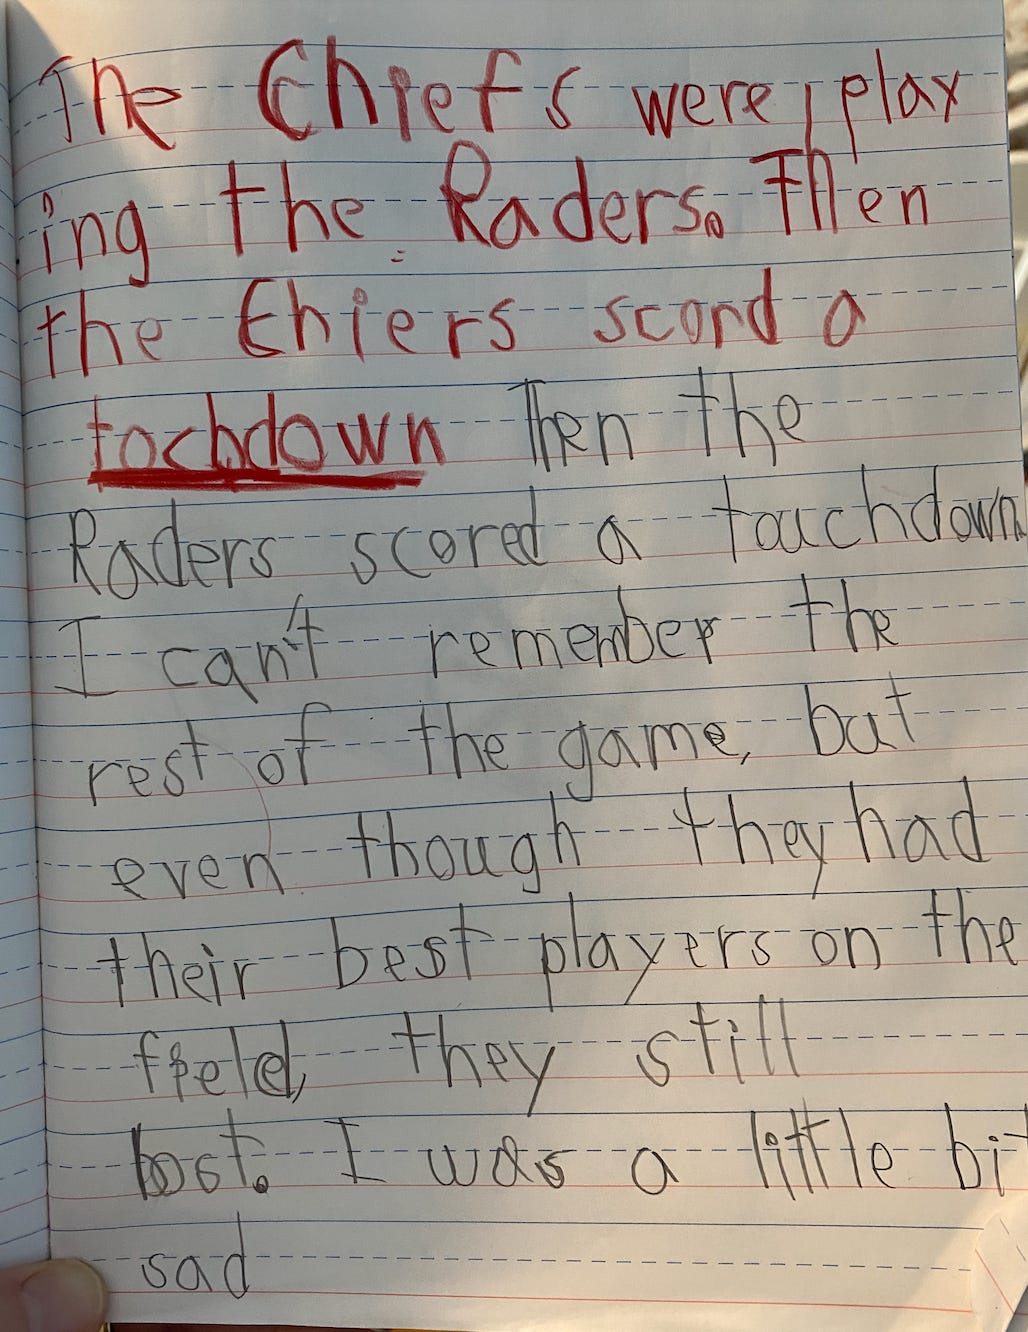 TRANSCRIPTION: The Chiefs were playing the Raiders. Then the Chiefs scored a touchdown. Then the Raiders scored a touchdown. I can’t remember the rest of the game. But even though they had their best players on the field, they still lost. I was a little bit sad.